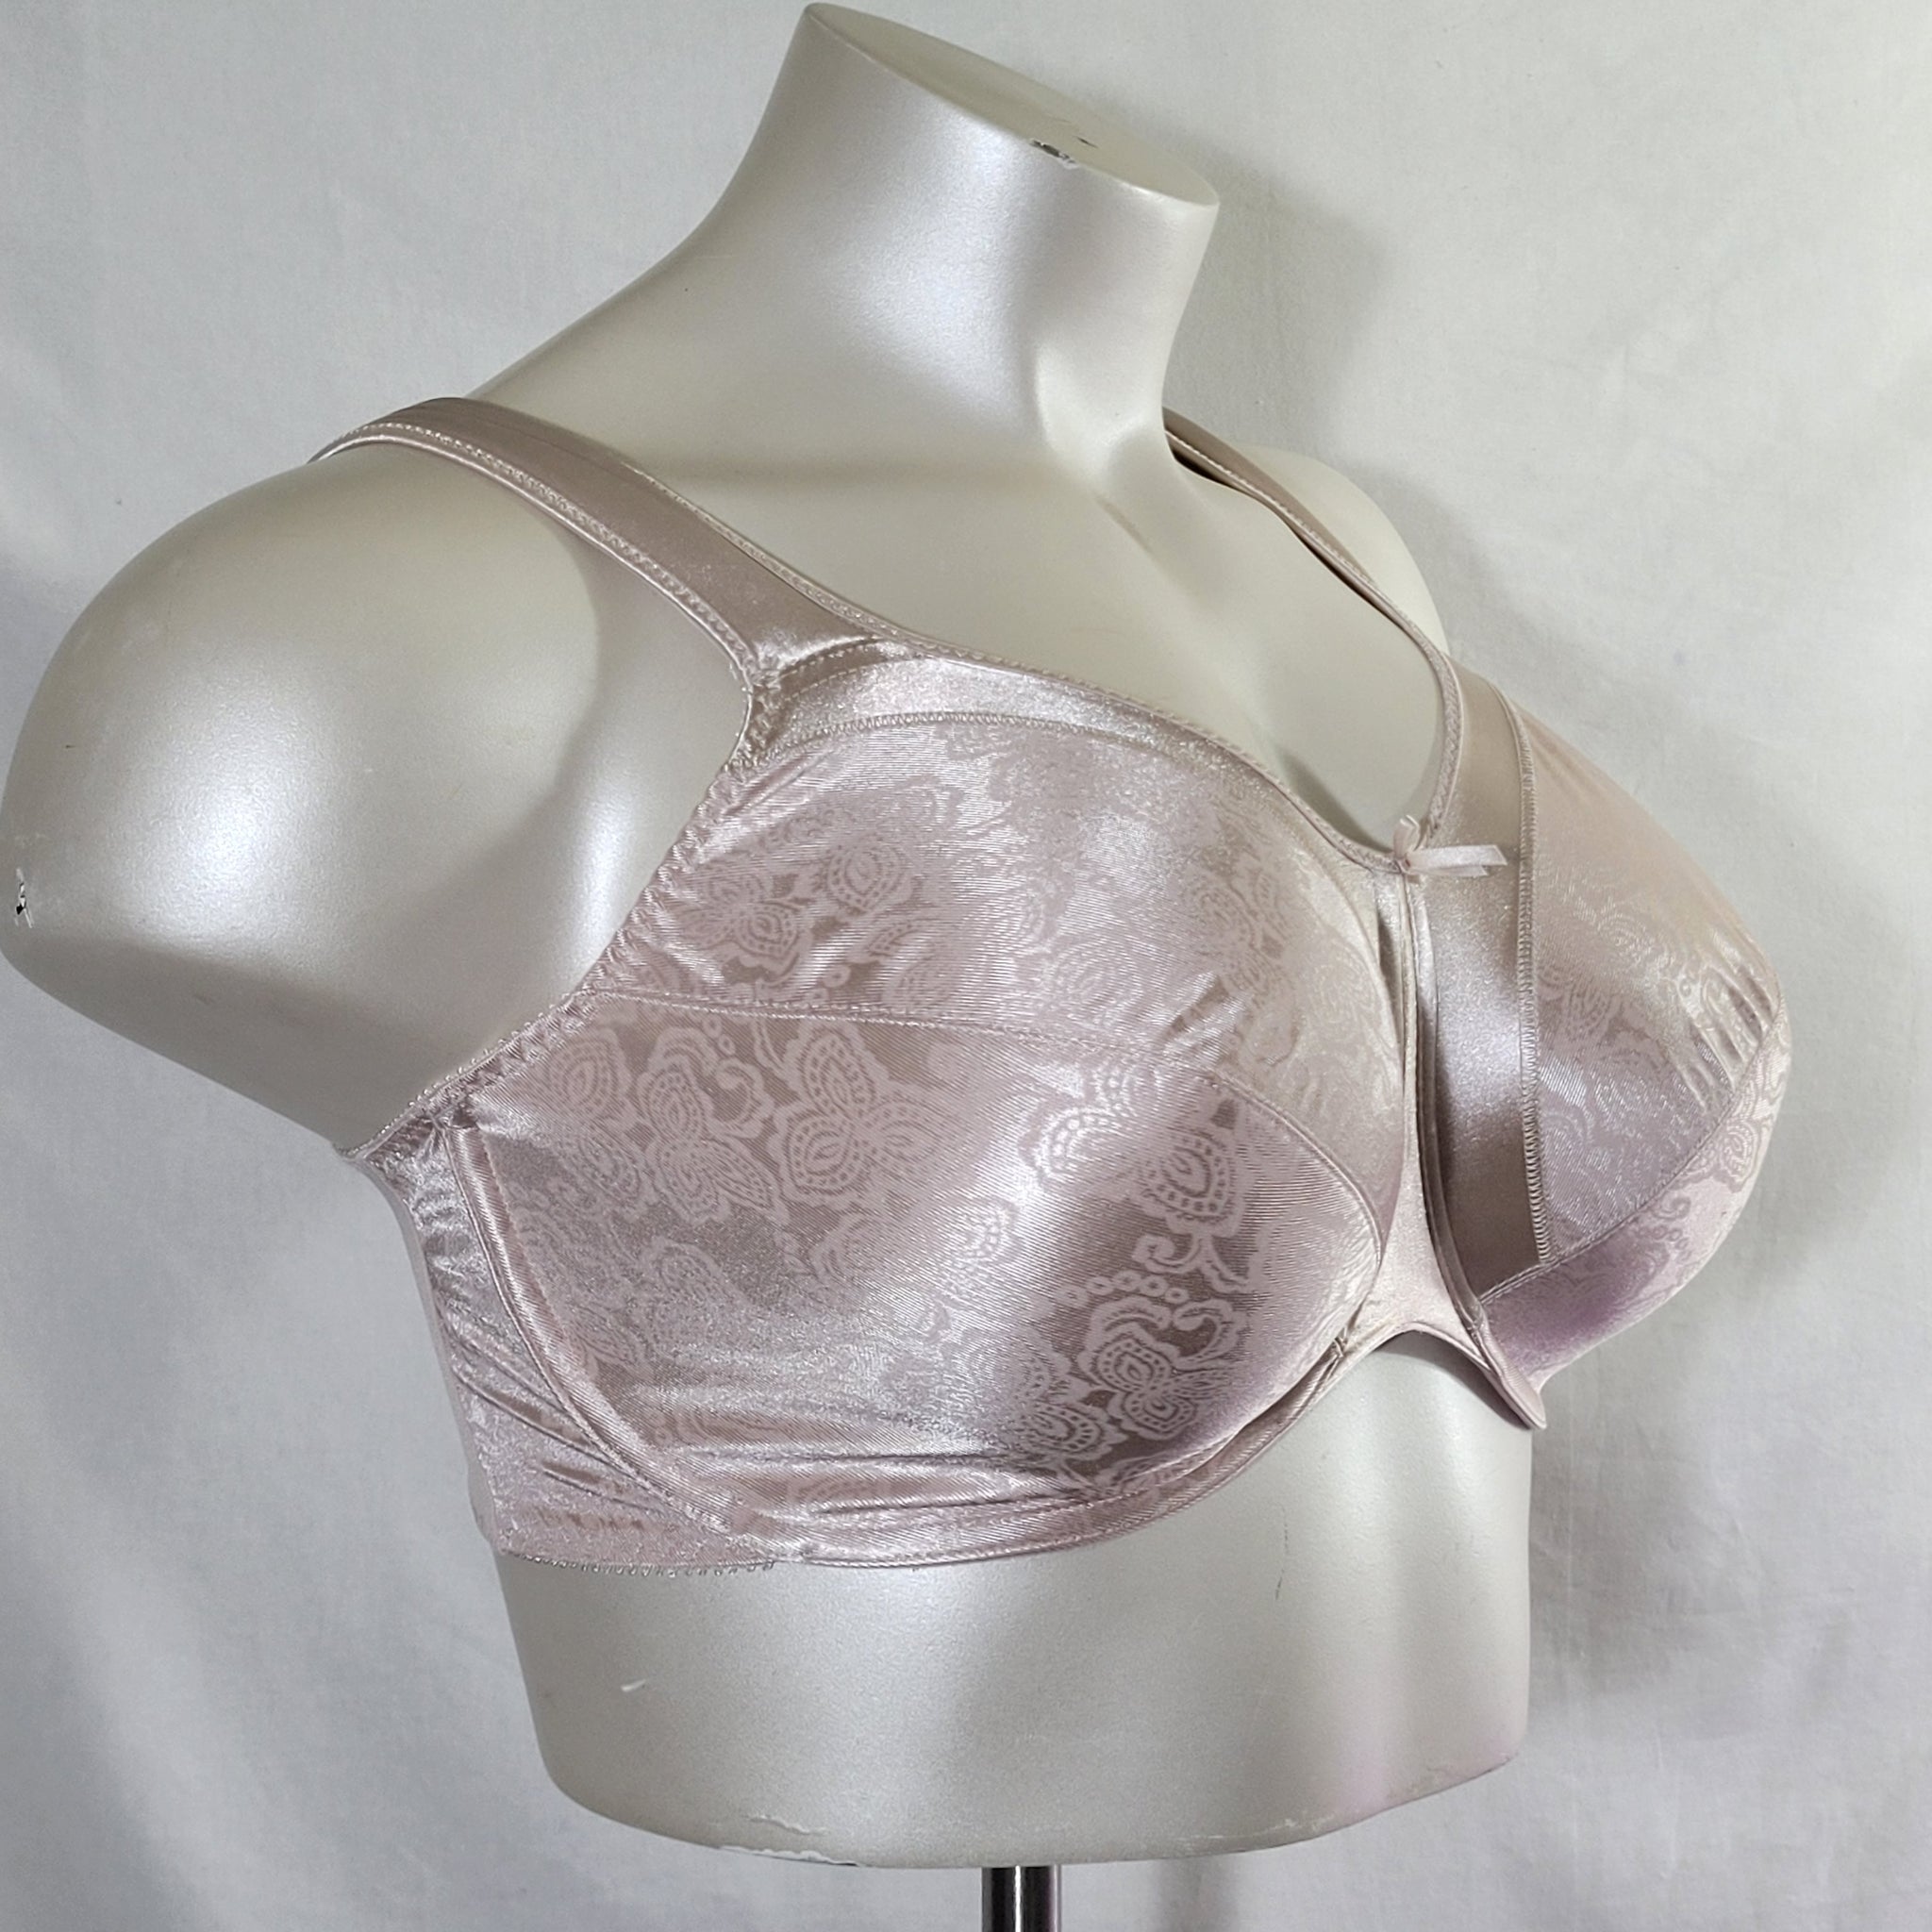 Satin Tracings Underwire Minimizer Bra (3562) Nude, 36G at